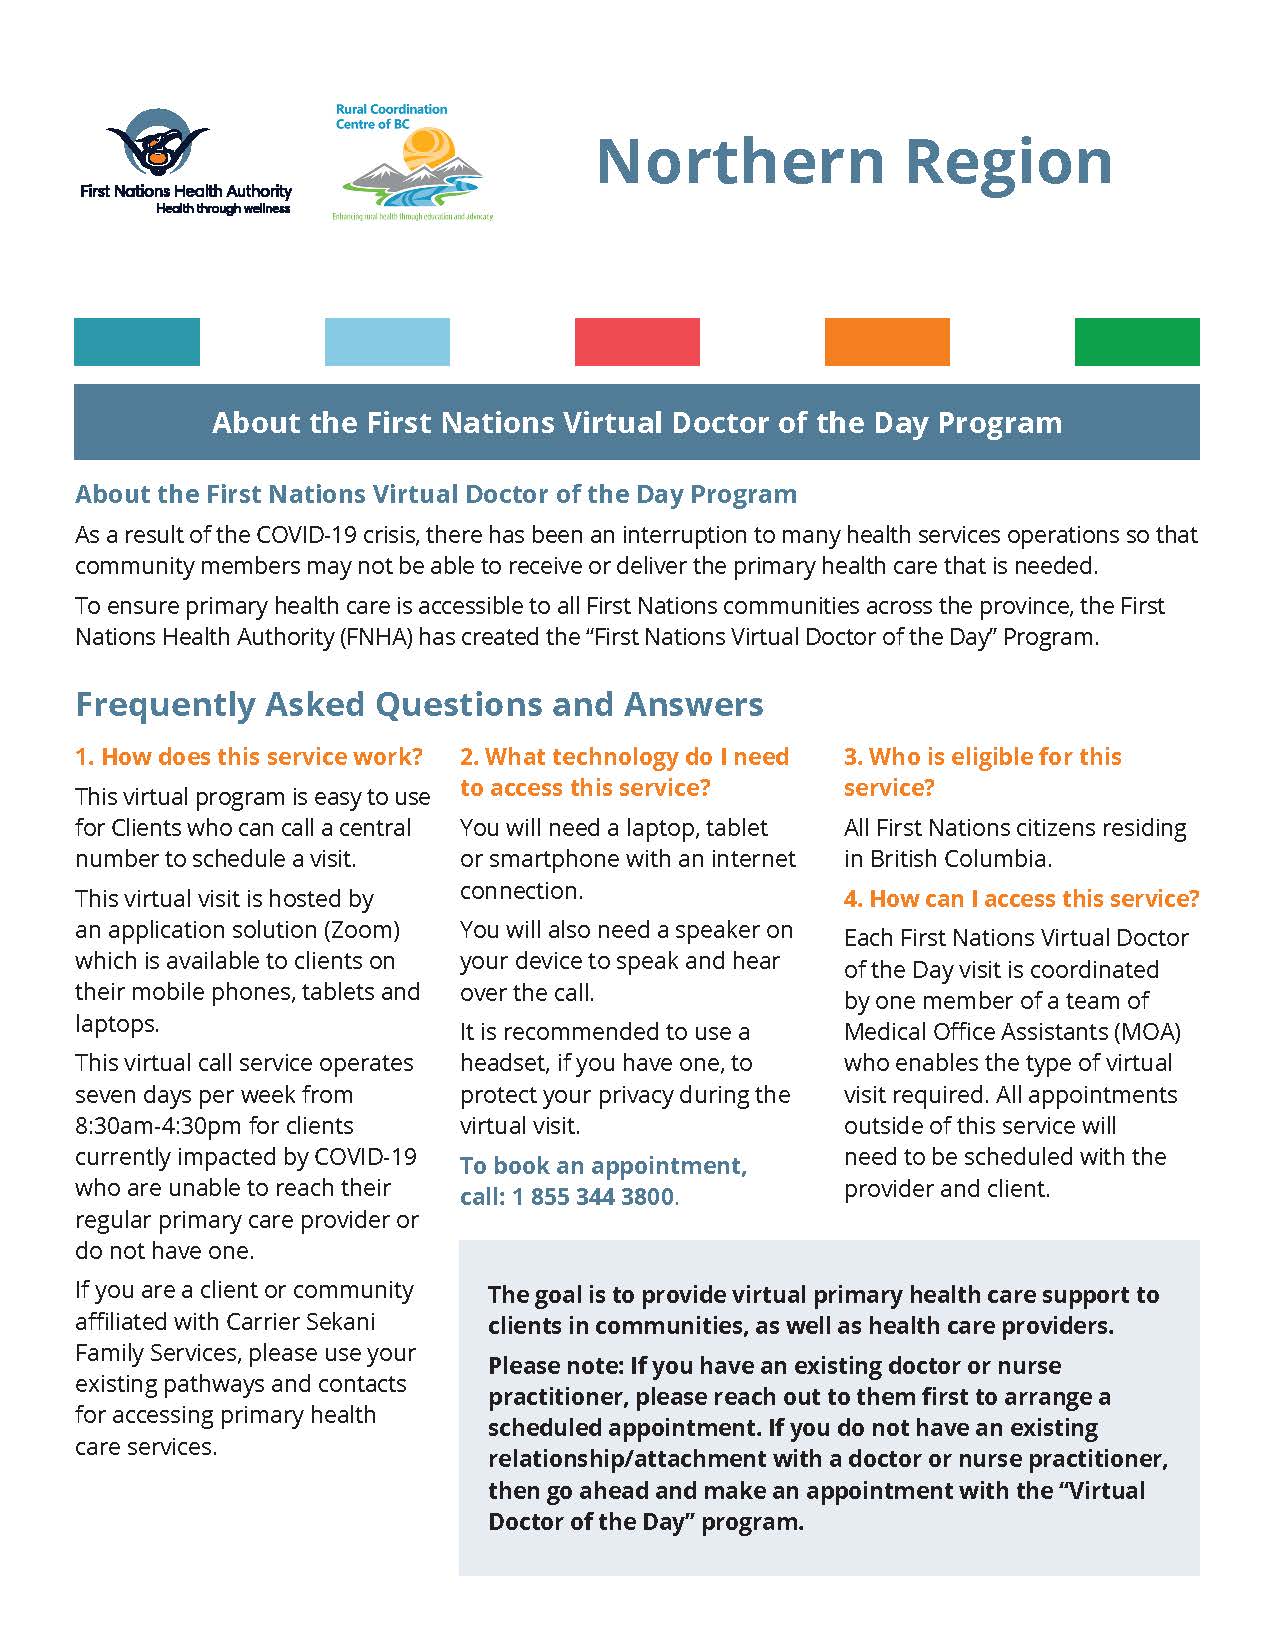 First Nations Virtual Doctor of the Day Program